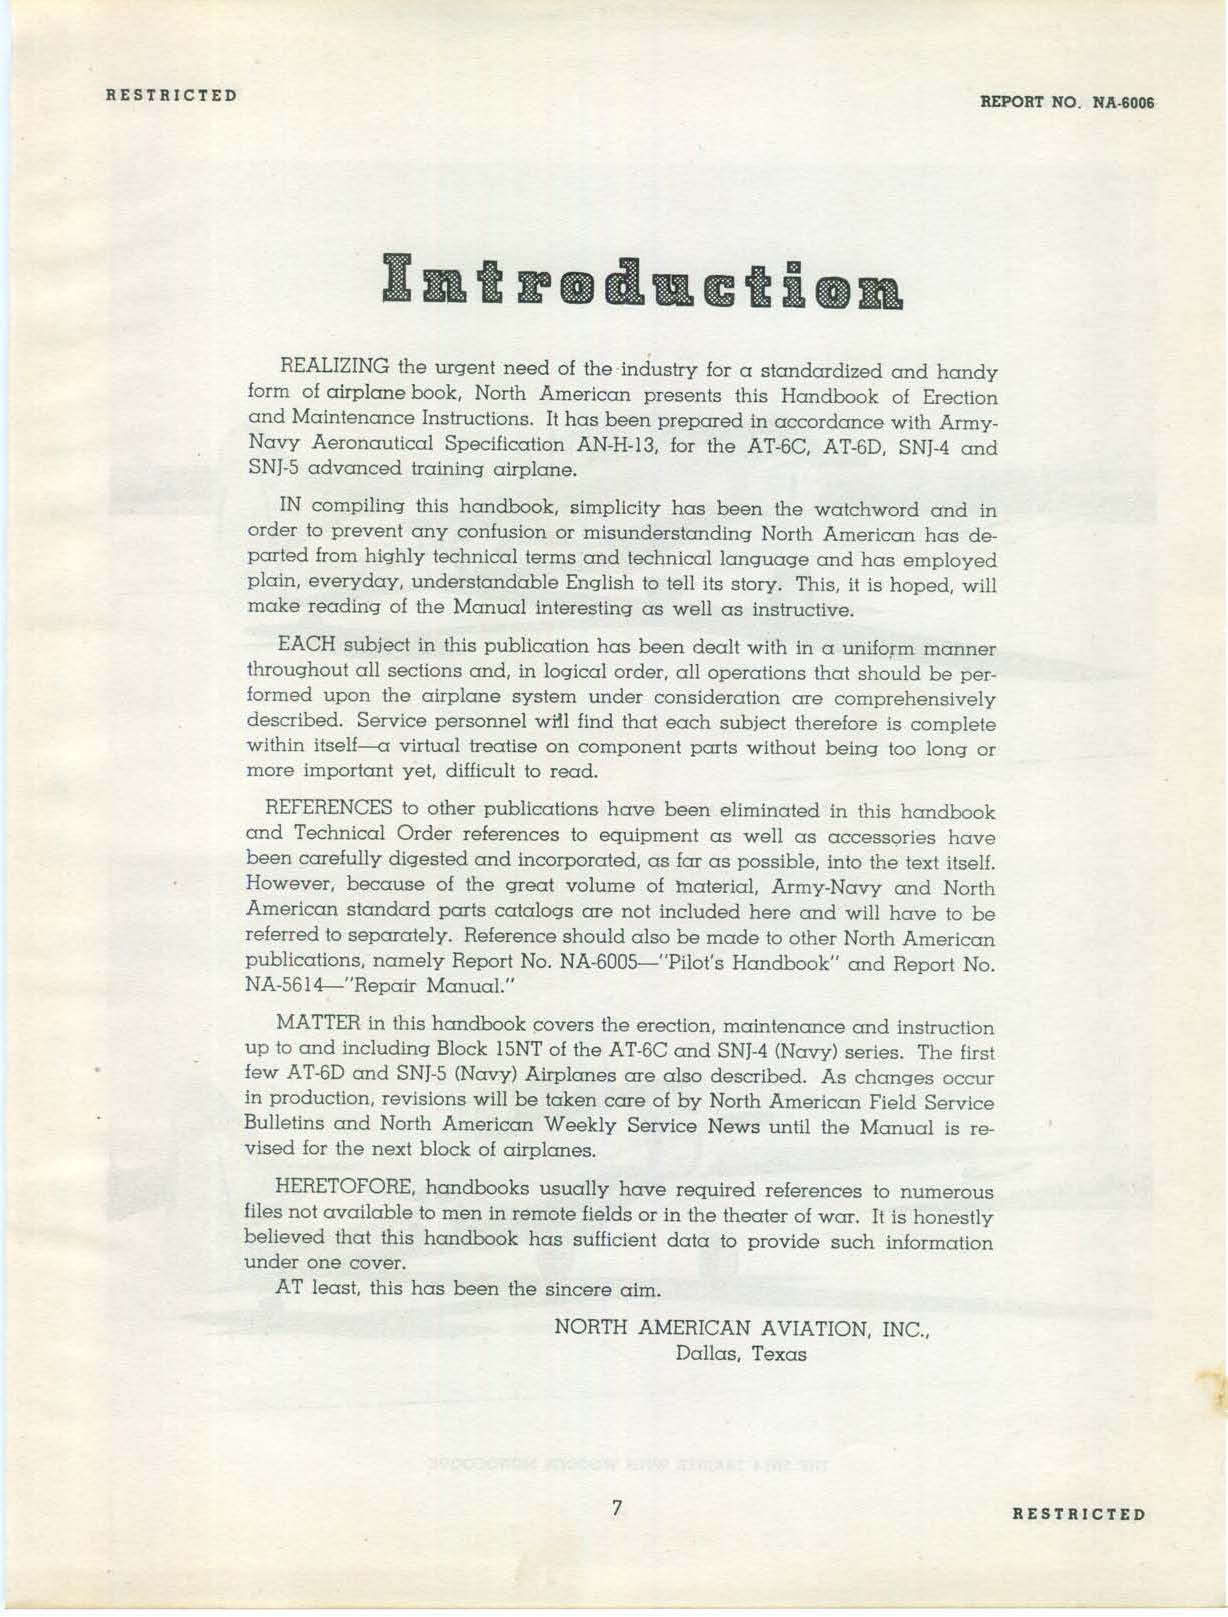 Sample page 9 from AirCorps Library document: Erection and Maintenance Instructions for Texan AT-6C, AT-6D, SNJ-4 and SNJ-5